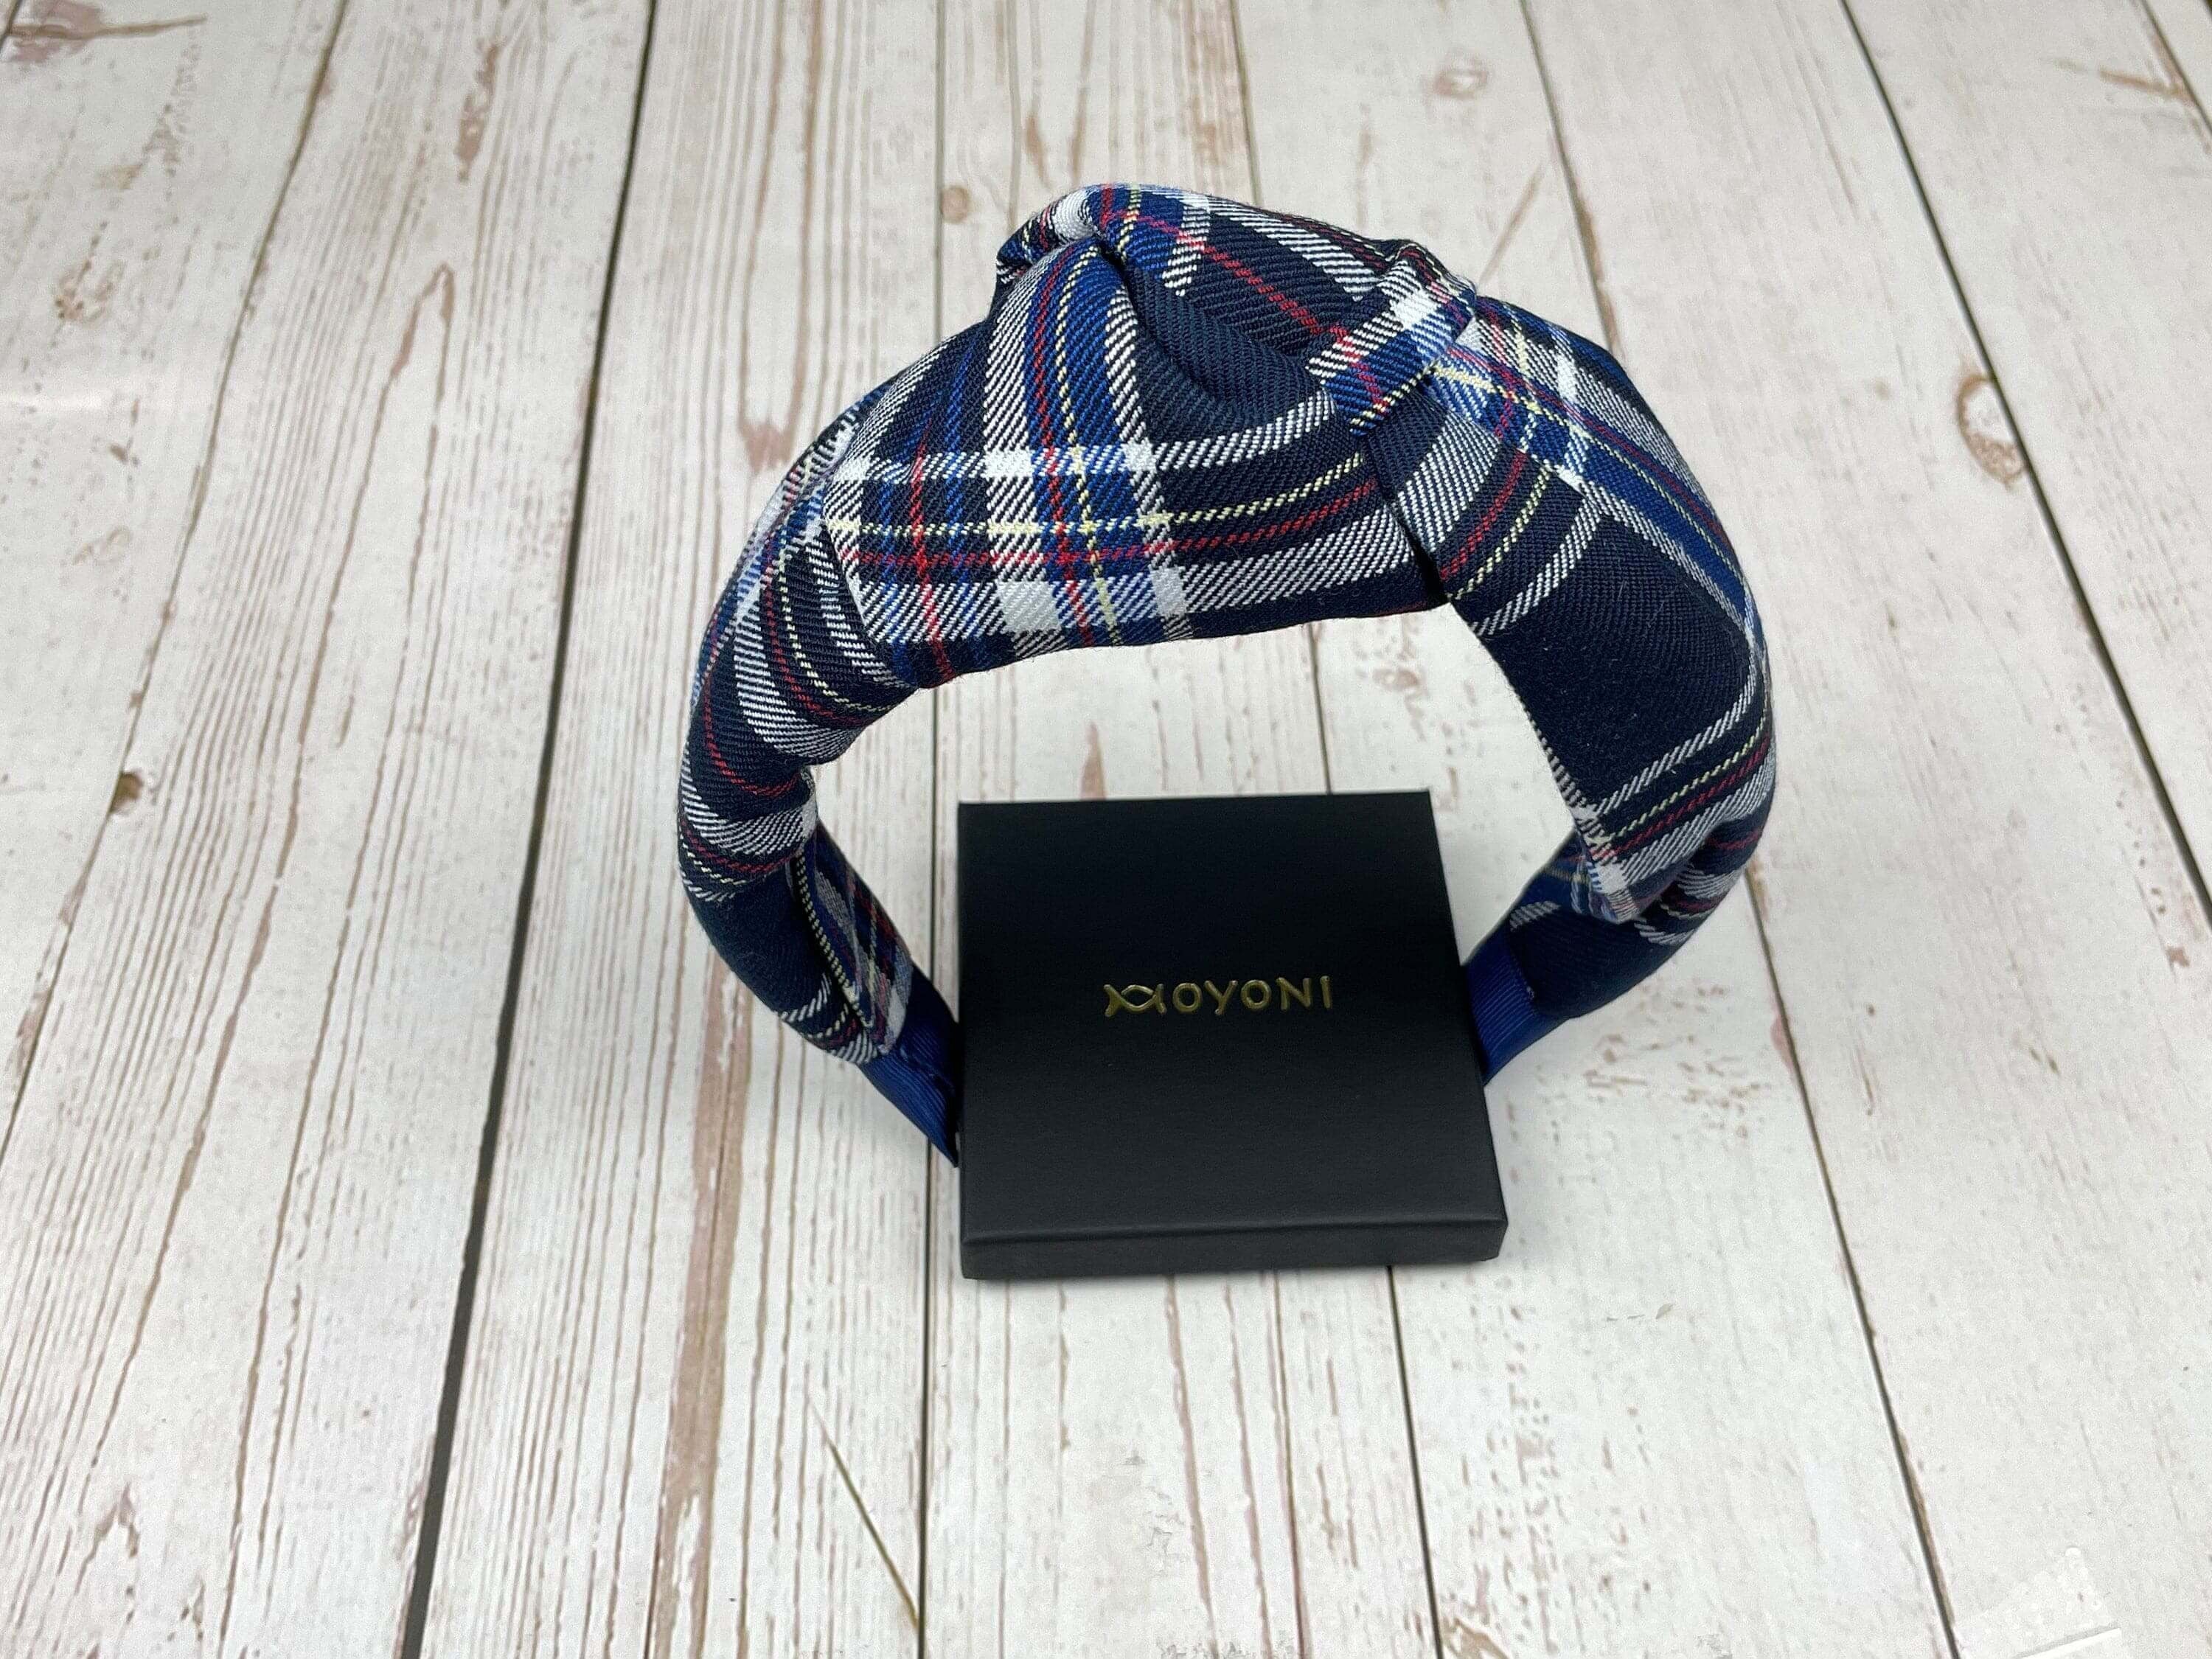 Make a statement with this headband! It comes in a cool blue plaid pattern, perfect for adding personality to any outfit.